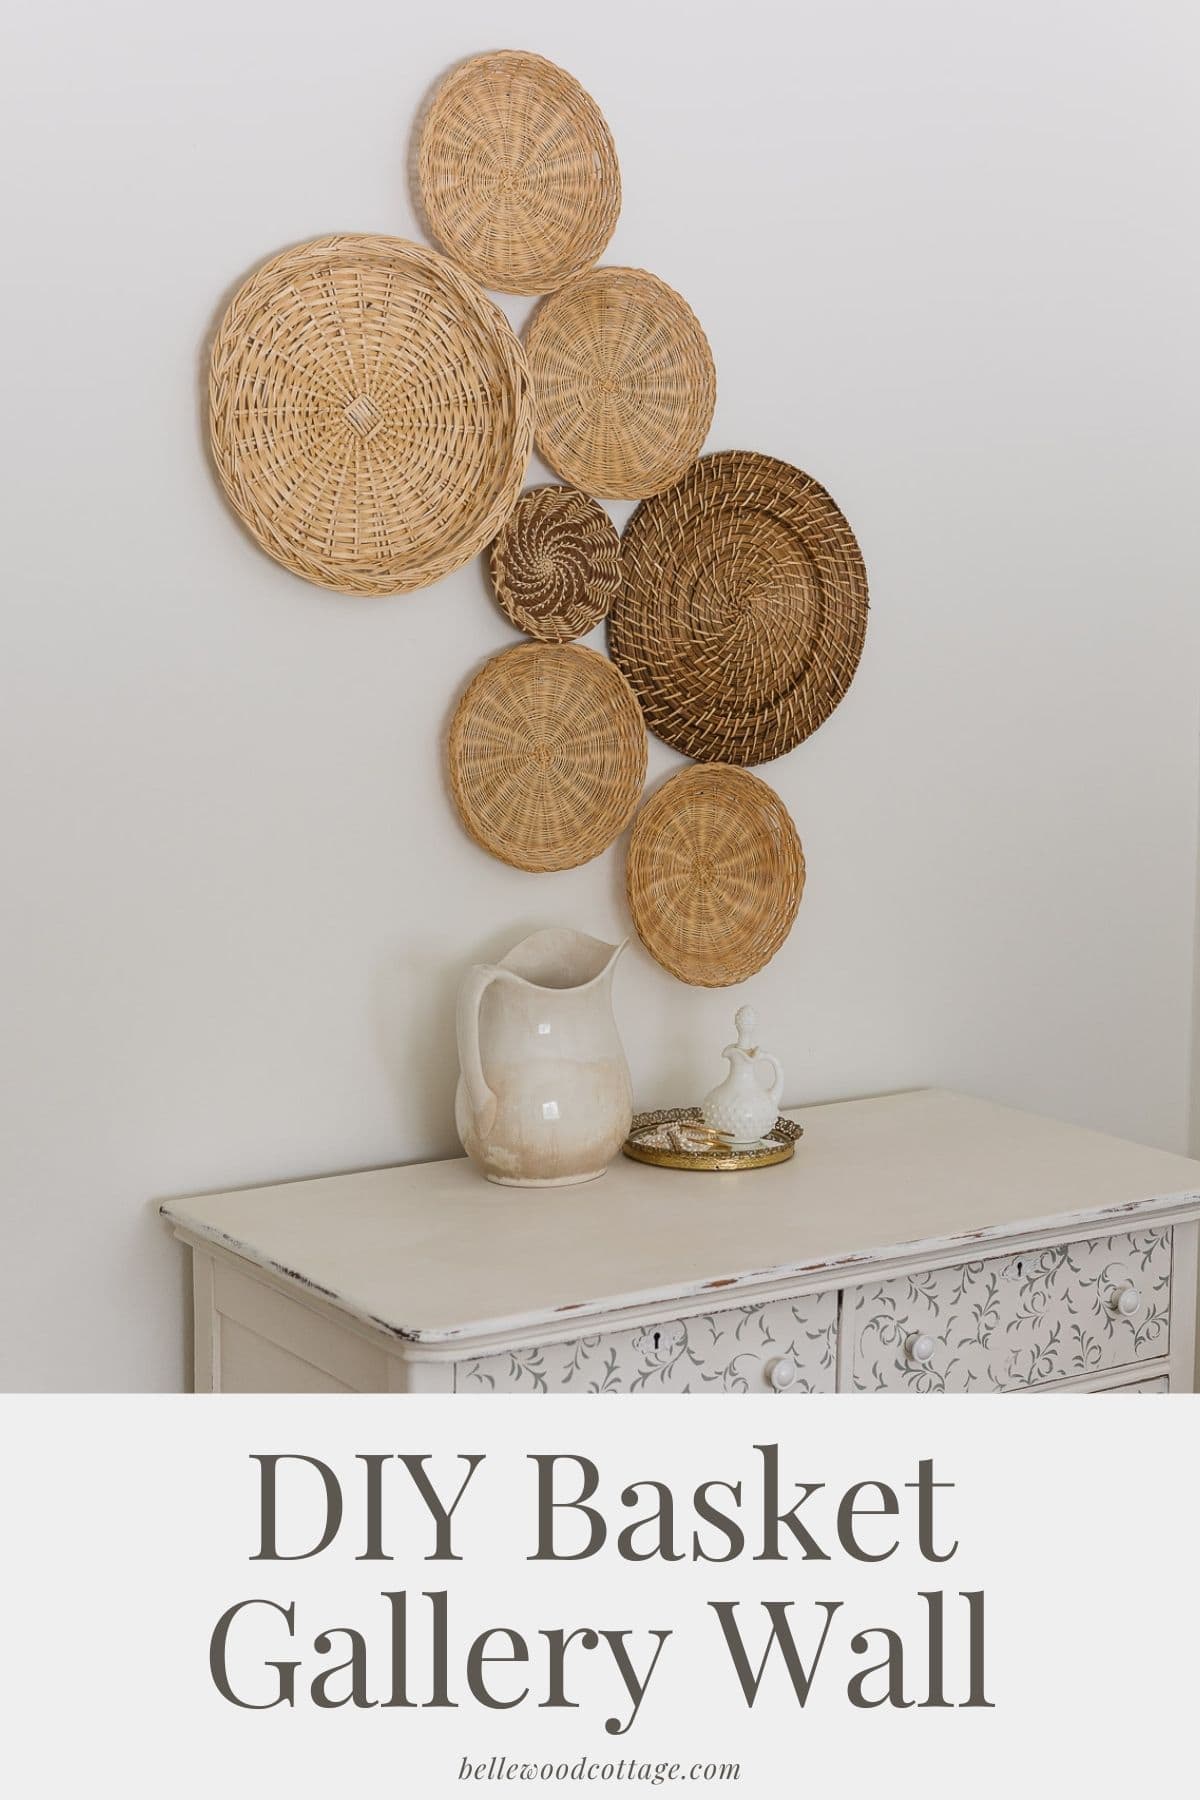 Vintage baskets arranged above a dresser with the words, "DIY Basket Gallery Wall".